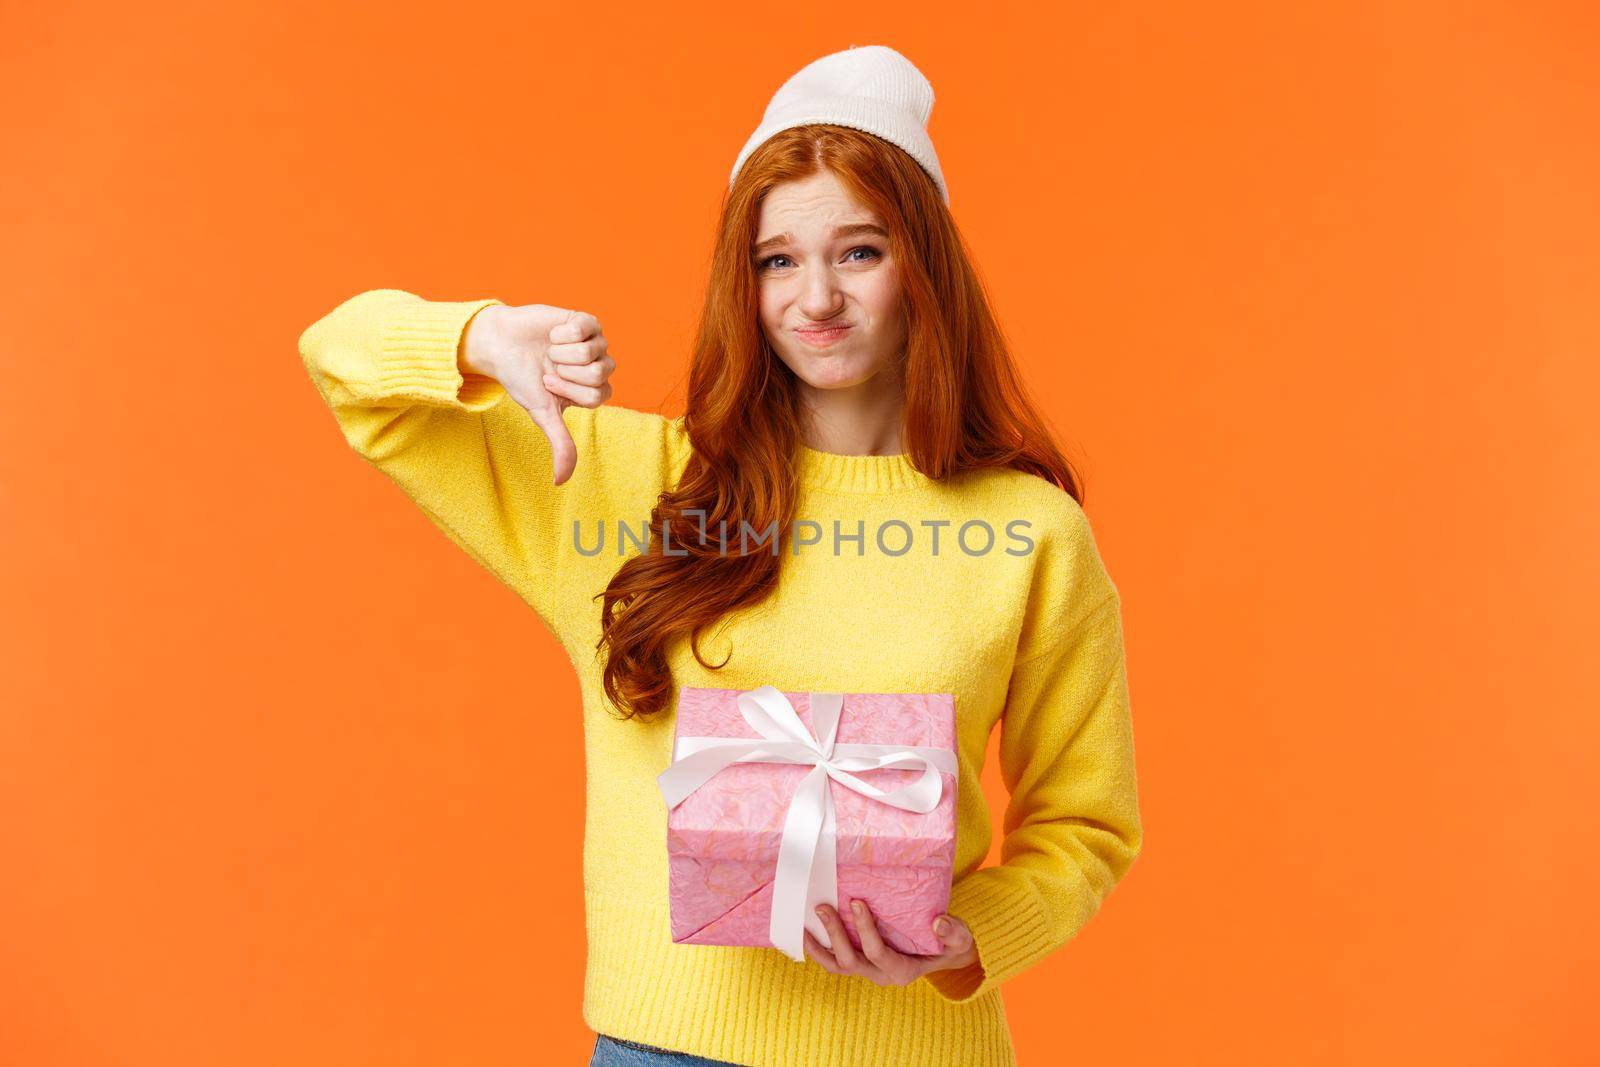 Skeptical and awkward cute redhead picky girl dont like christmas gift from aunt, show thumb-down, grimacing with uncomfortable judgemental expression, holding pink ugly present, orange background.